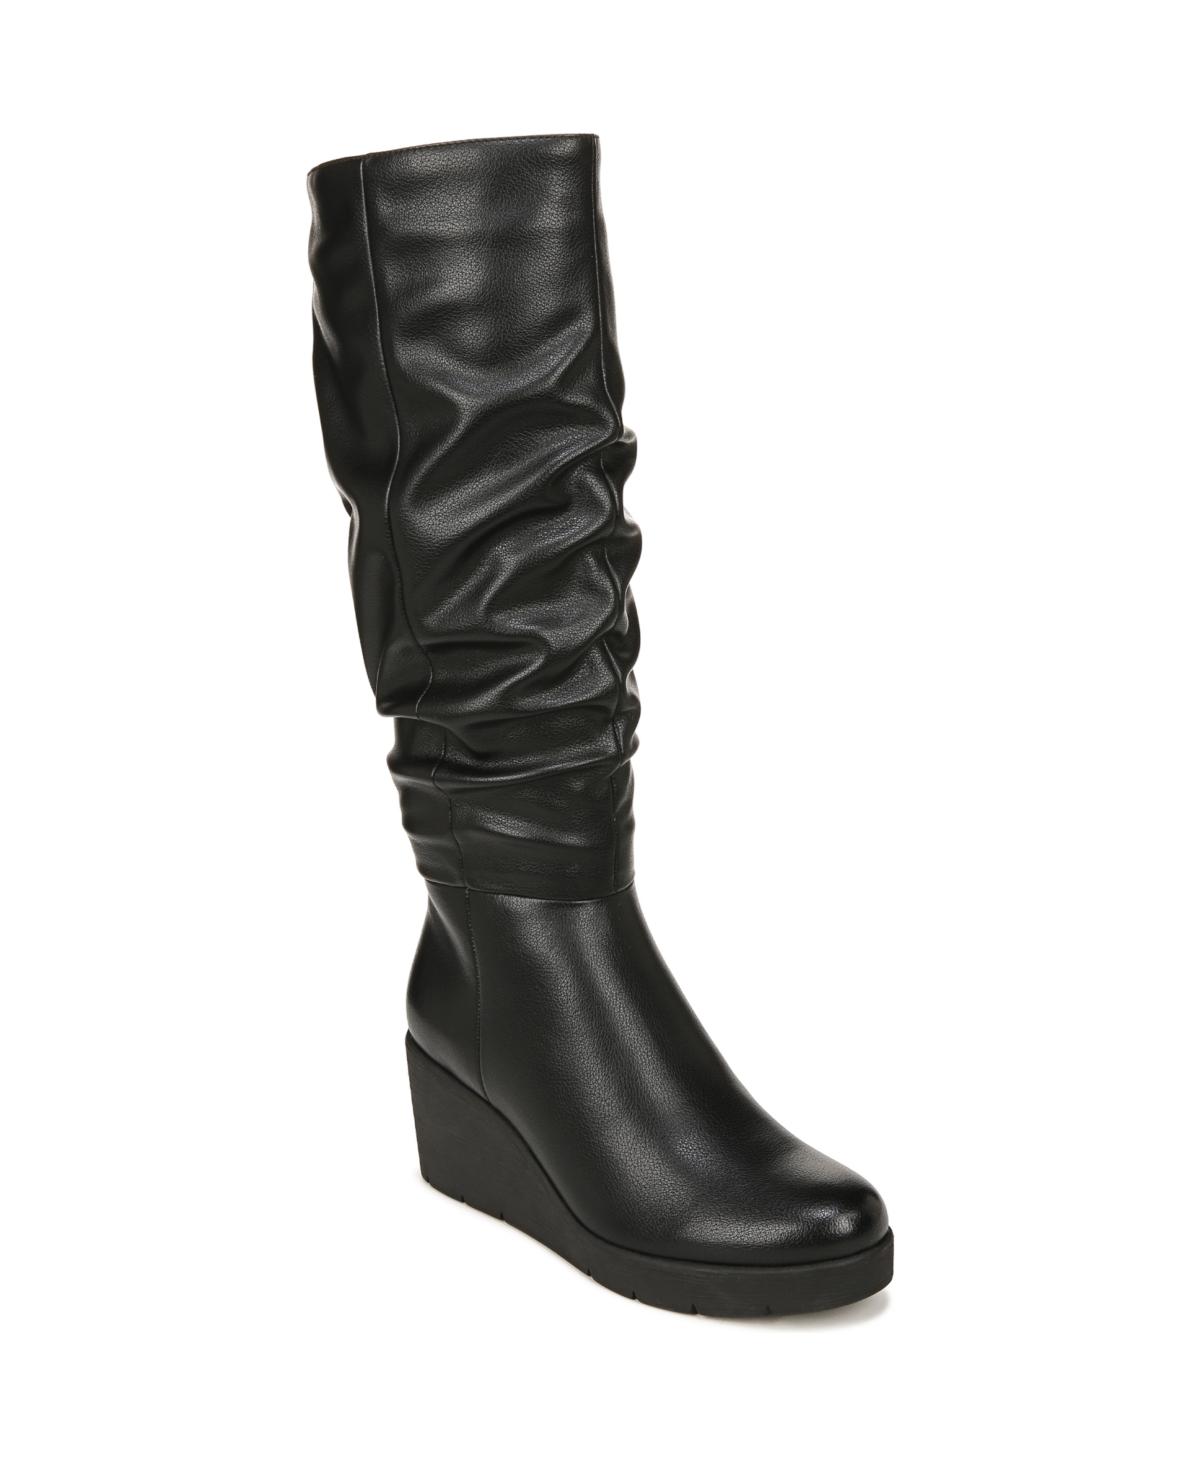 SOUL NATURALIZER AURA RUCHED WEDGE BOOTS